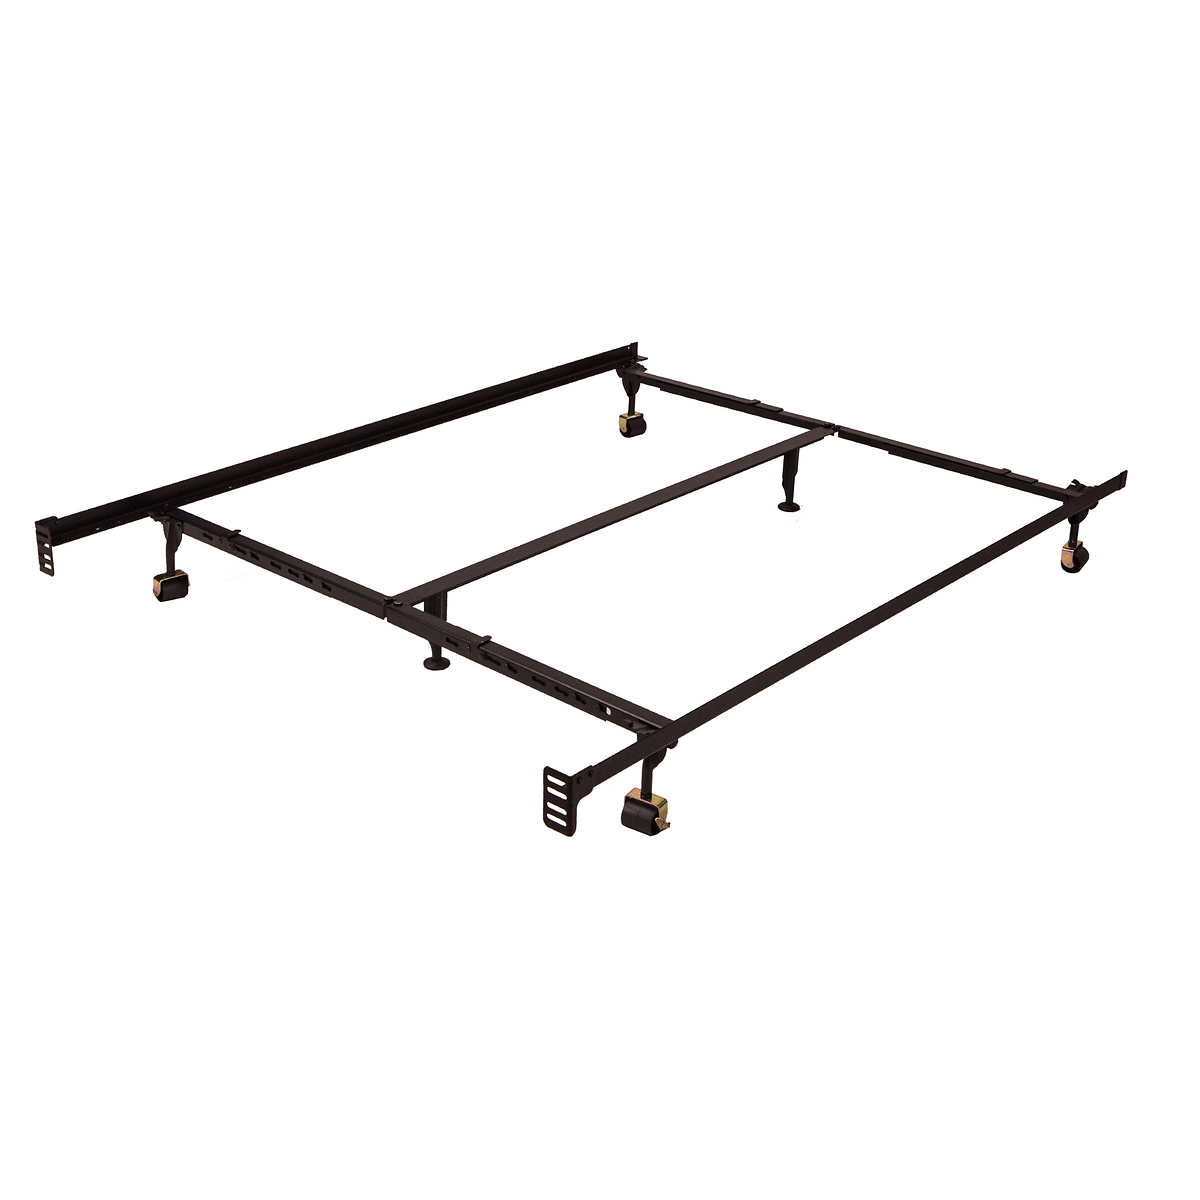 Premium Universal Lev R Lock Bed Frame, Bed Frame Bolts Sizes